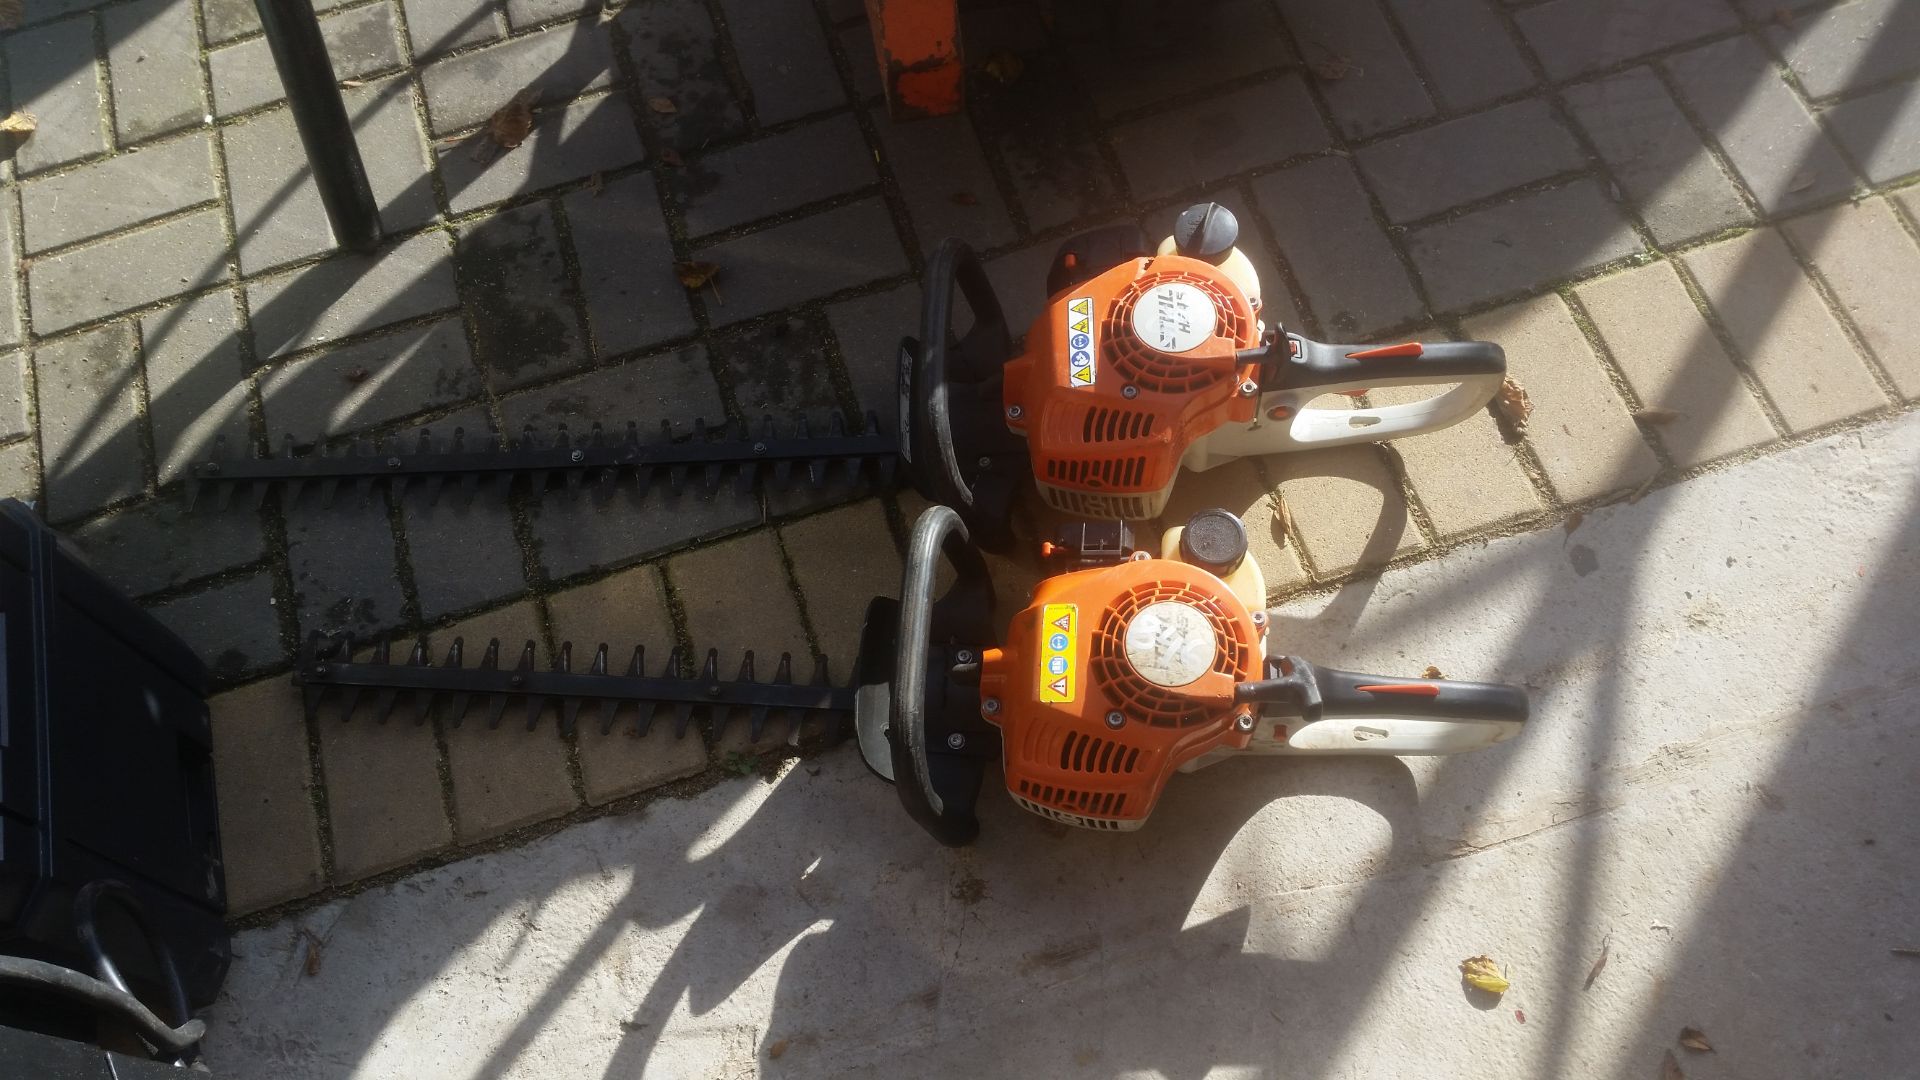 2 x STIHL HS45 HEDGE TRIMMERS, BOTH RUN, NEED NEW GRAB HANDLES AND AIR FILTERS *NO VAT*